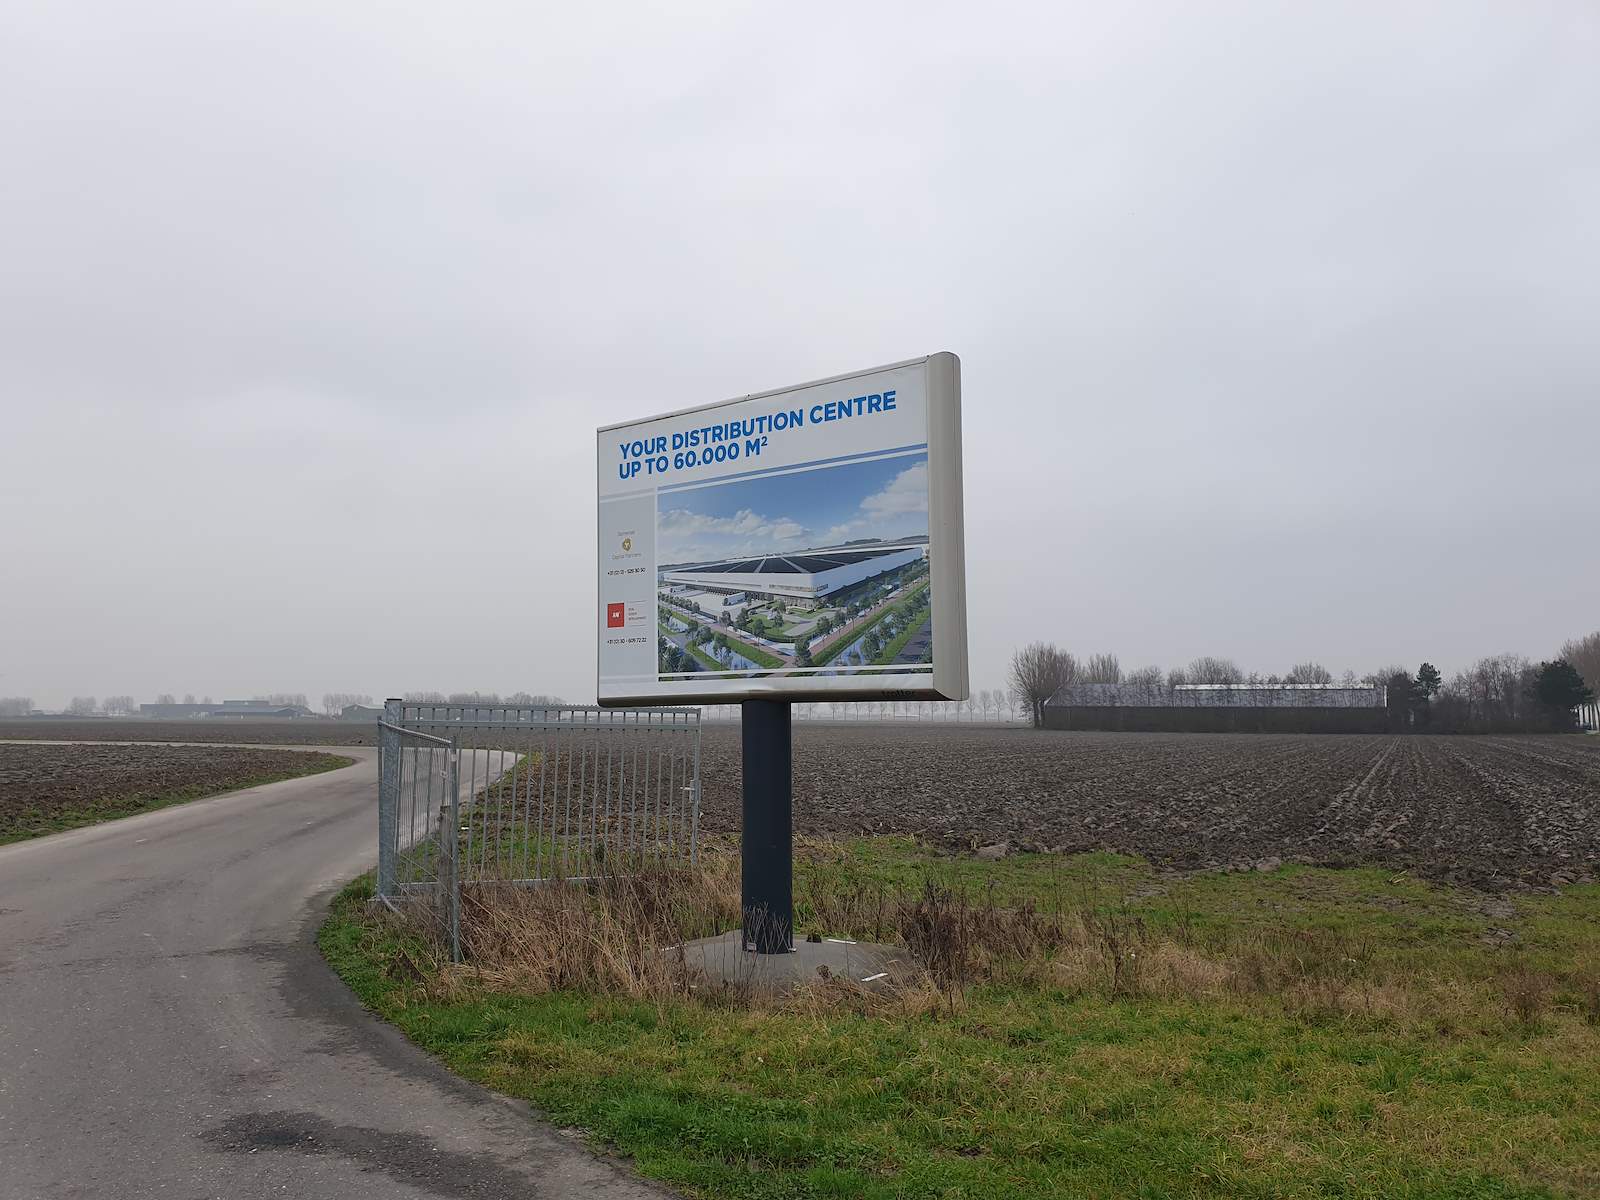 Ambitions for Europe’s most sustainable business park, Schiphol Trade Park